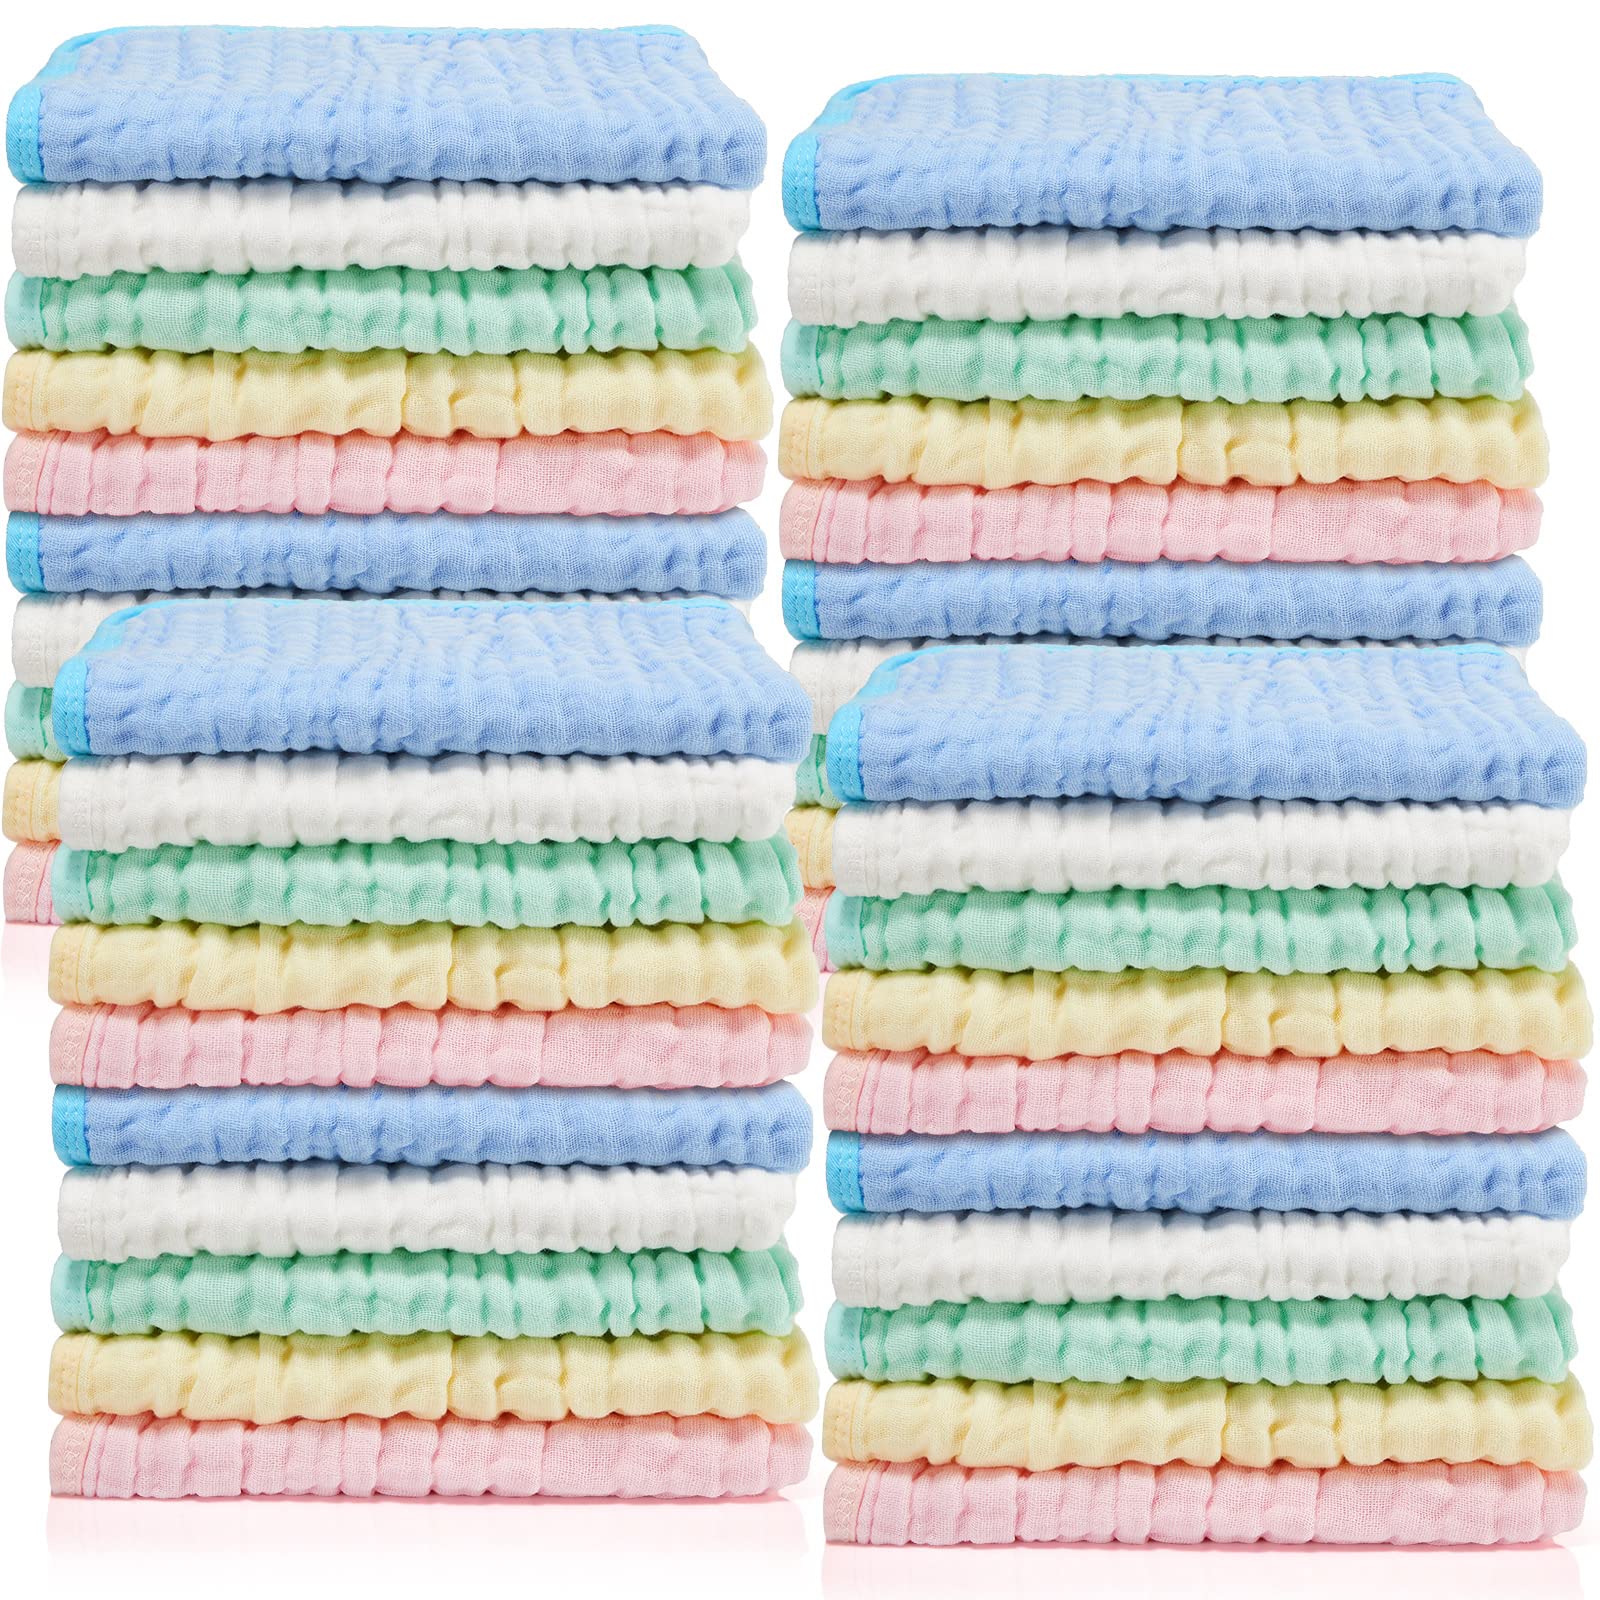 Tudomro 20 Pack Muslin Burp Cloths 20 x 10 Inch Absorbent Baby Burping Cloth 6 Layers Baby Rags Face Towels, 5 Colors